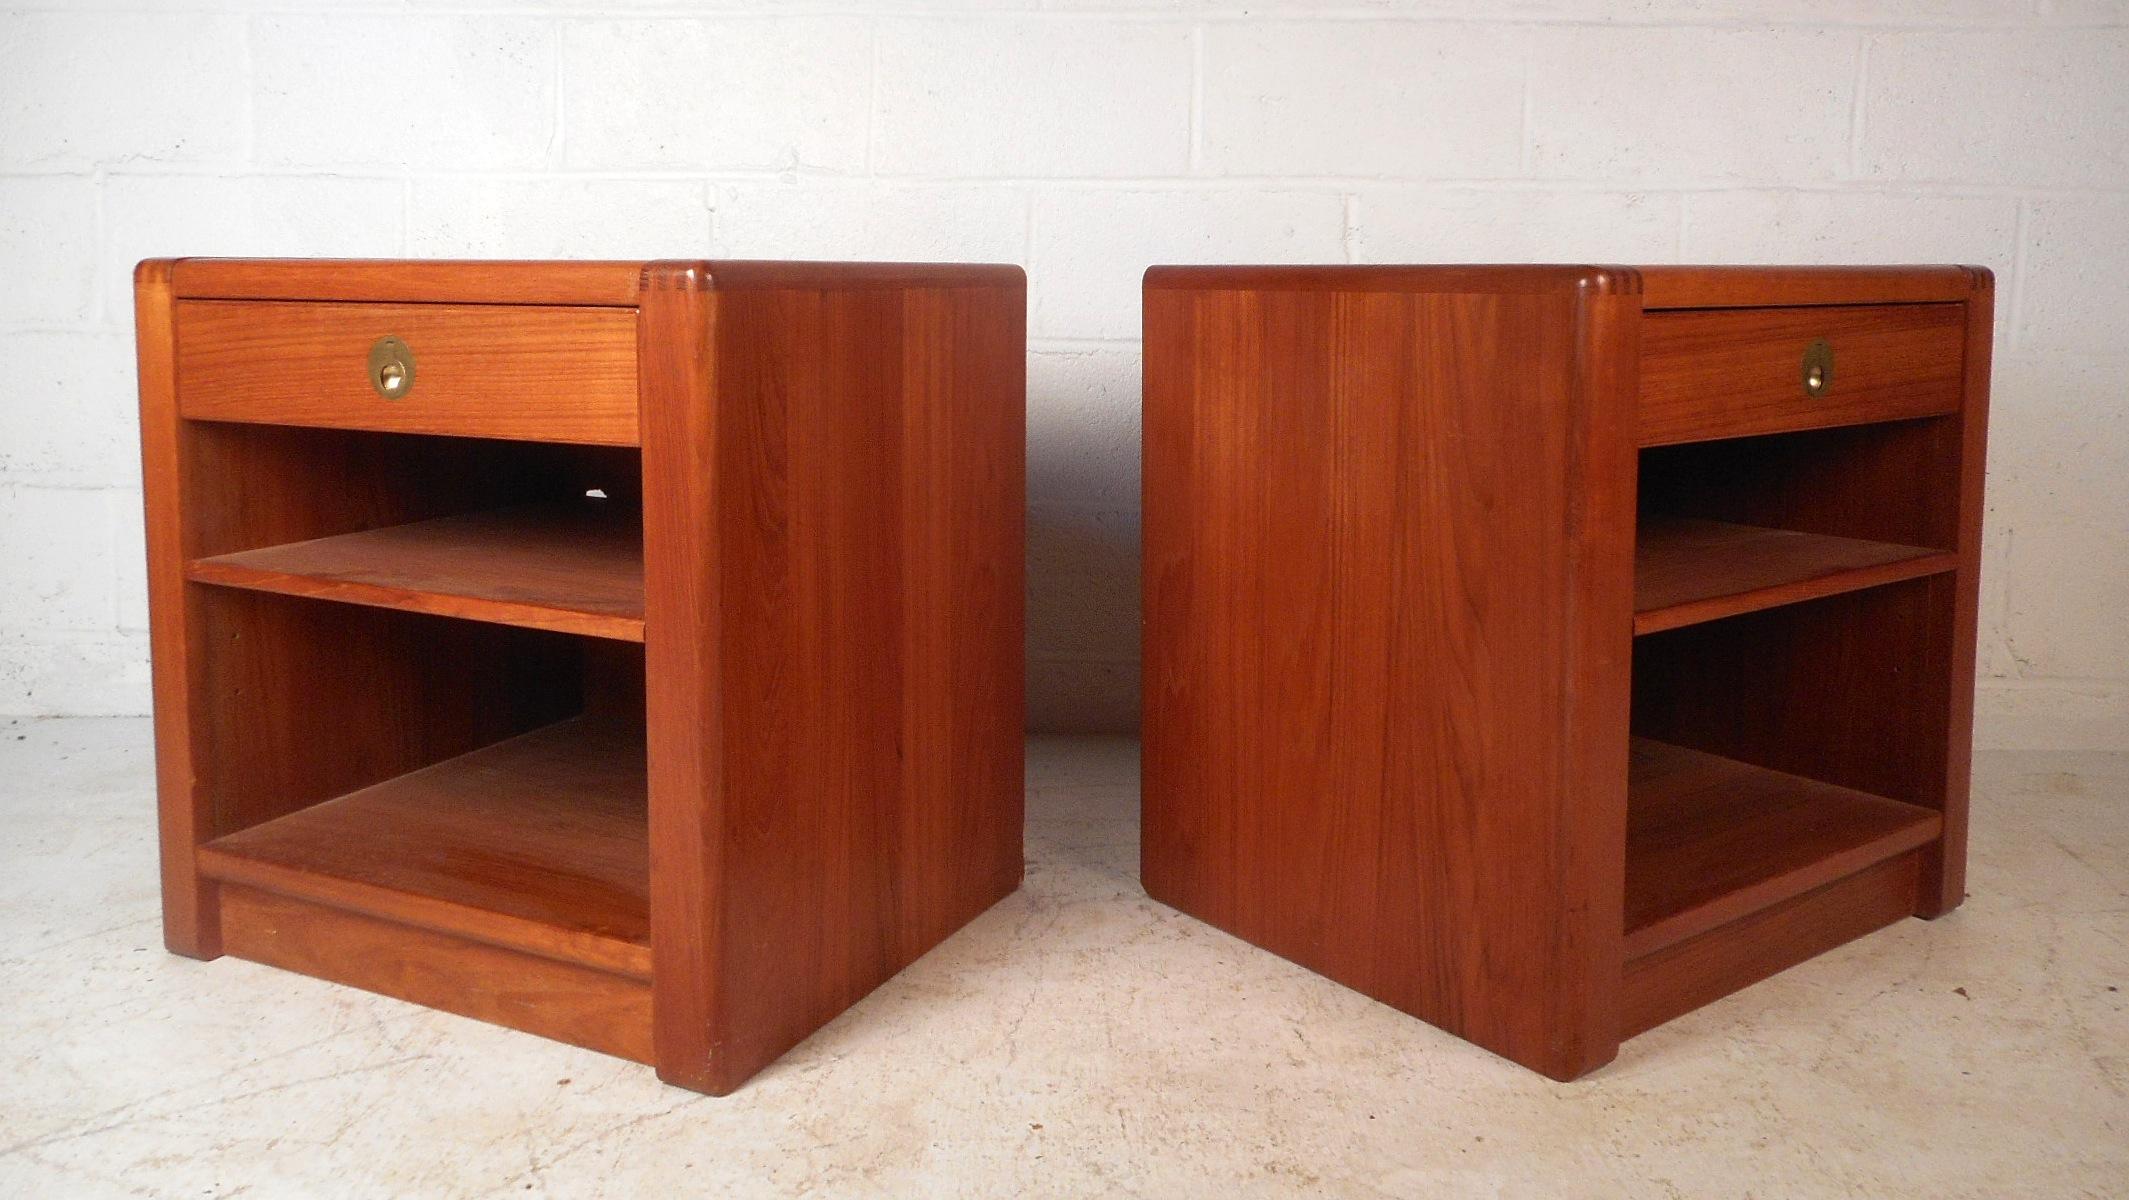 This beautiful pair of Danish teak nightstands have a sleek design and plenty of storage space. The drawers feature unique recessed brass pulls. These nightstands boast rounded off dovetail joints, adding style to the sturdy construction. Please